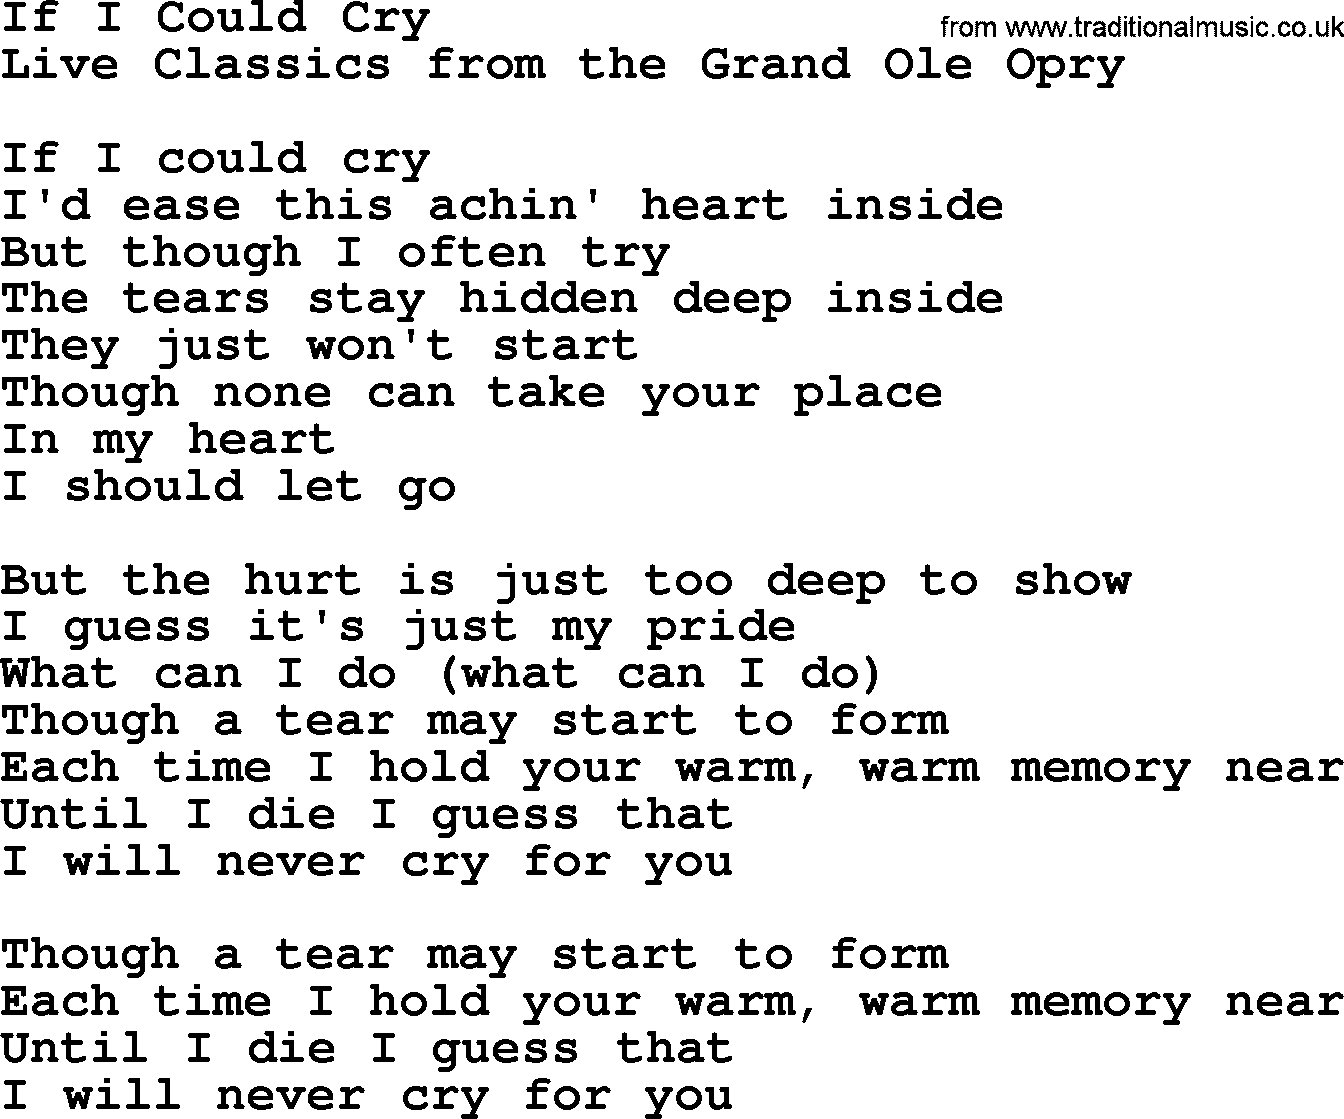 Marty Robbins song: If I Could Cry, lyrics